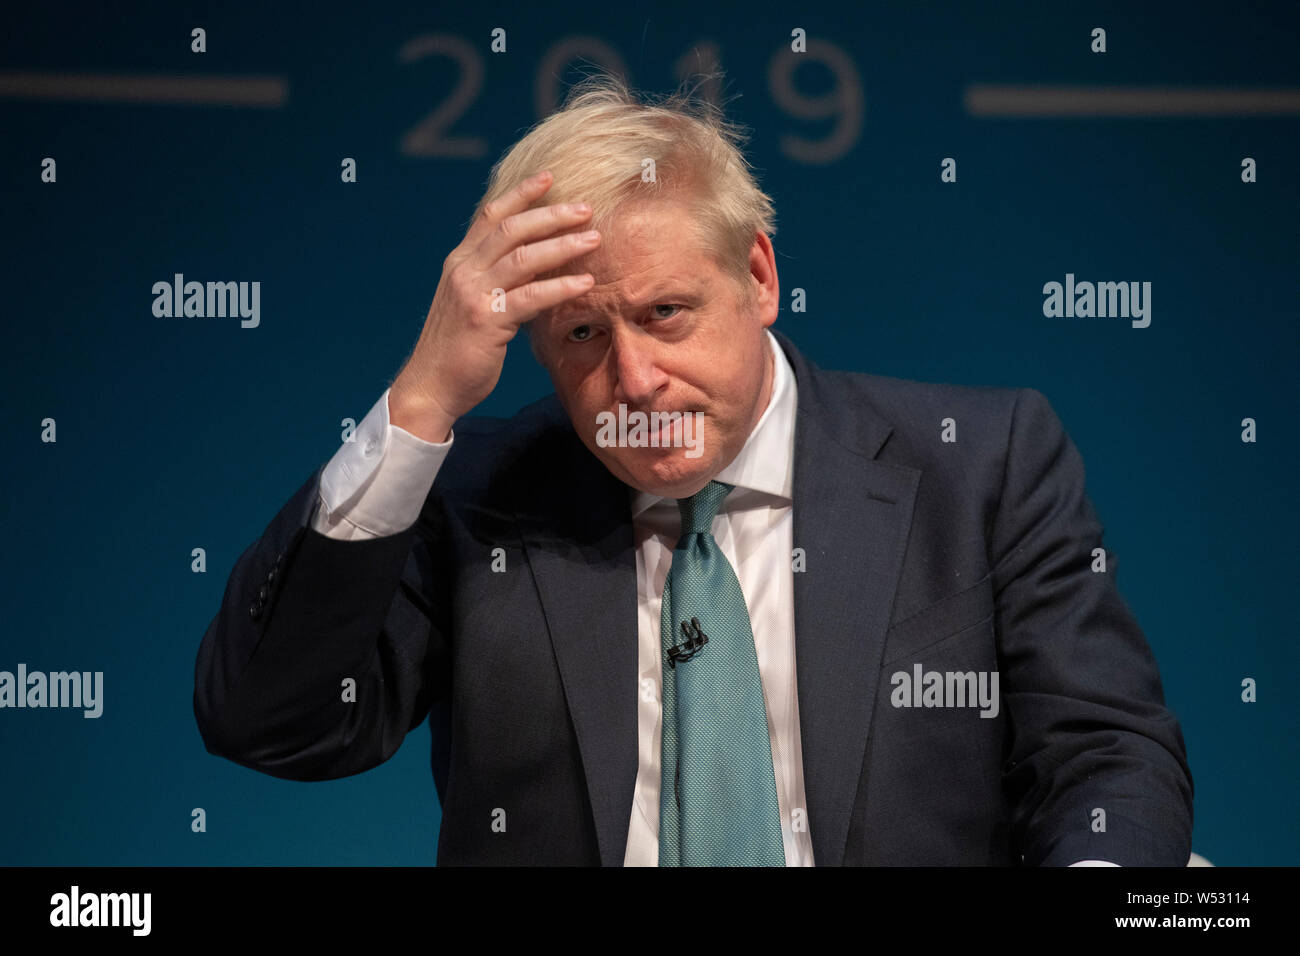 Conservative leadership candidate Boris Johnson at the Darlington leadership hustings on July 05, 2019 in Guisborough, England. Boris Johnson and Jeremy Hunt are the final two MPs left in the contest to replace Theresa May as leader of the Conservative Party. Stock Photo